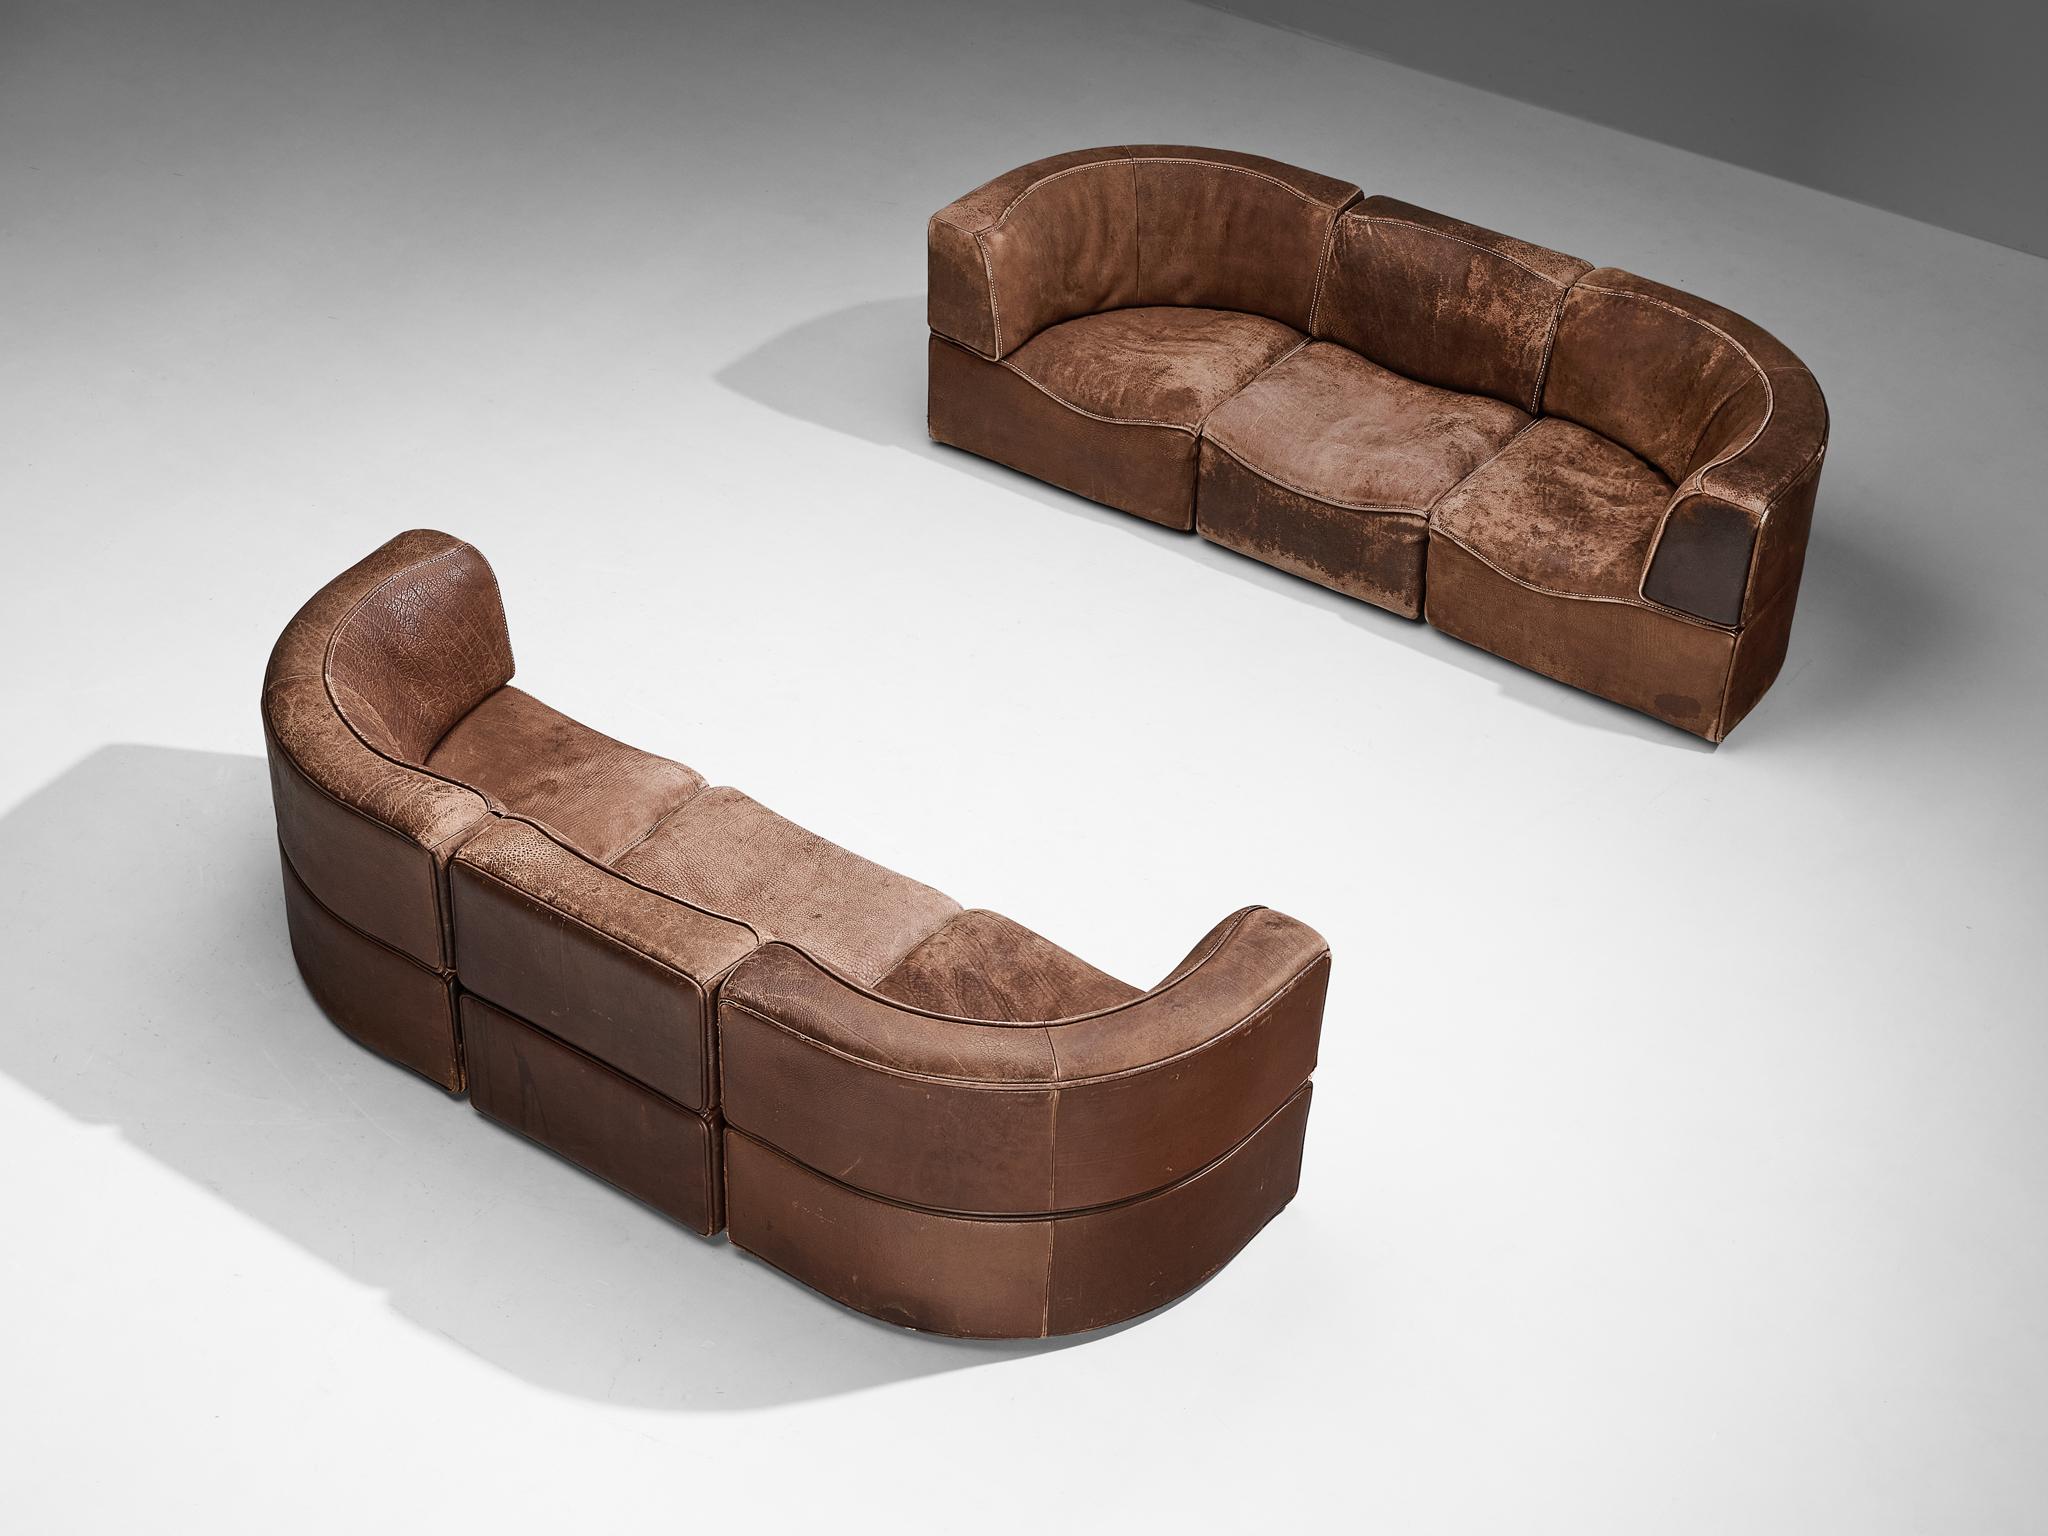 De Sede, 'DS-15' modular sofa, patinated leather, Switzerland, 1970s.

This high-quality sectional sofa designed by De Sede in the 1970s contains three regular elements and three corner elements, making it possible to arrange this sofa to your own